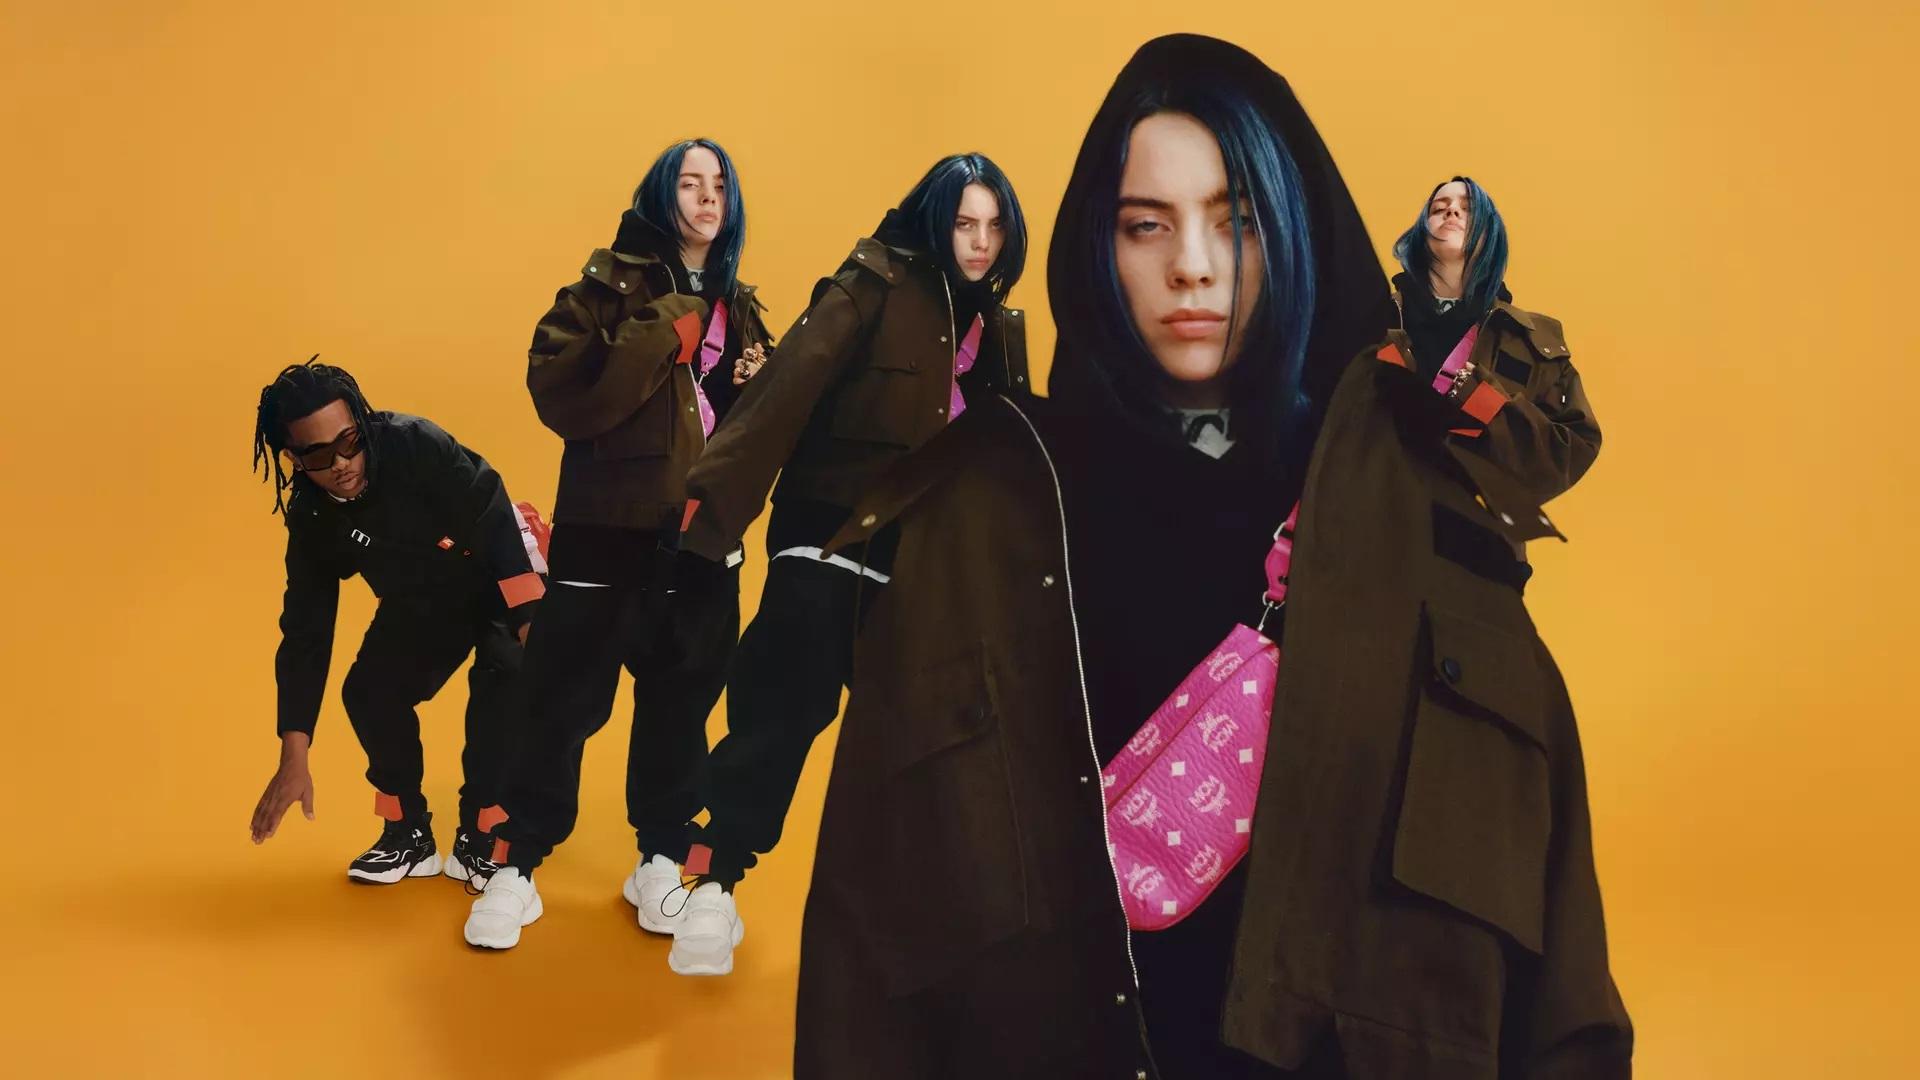 MCM taps Billie Eilish and Childish Major to front AW19